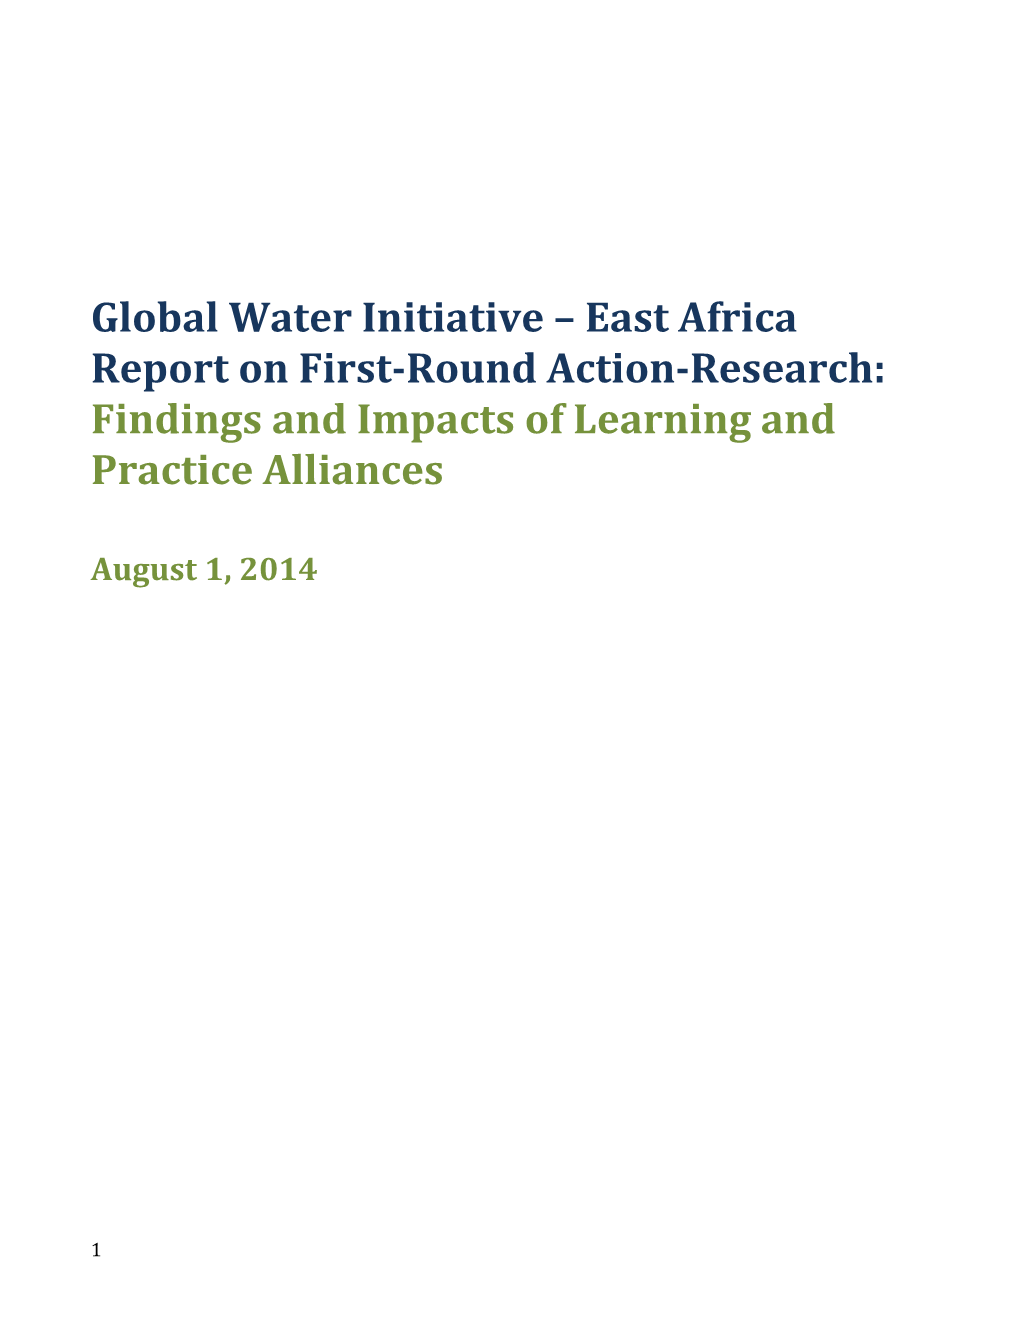 Global Water Initiative East Africa Report on First-Round Action-Research: Findings And